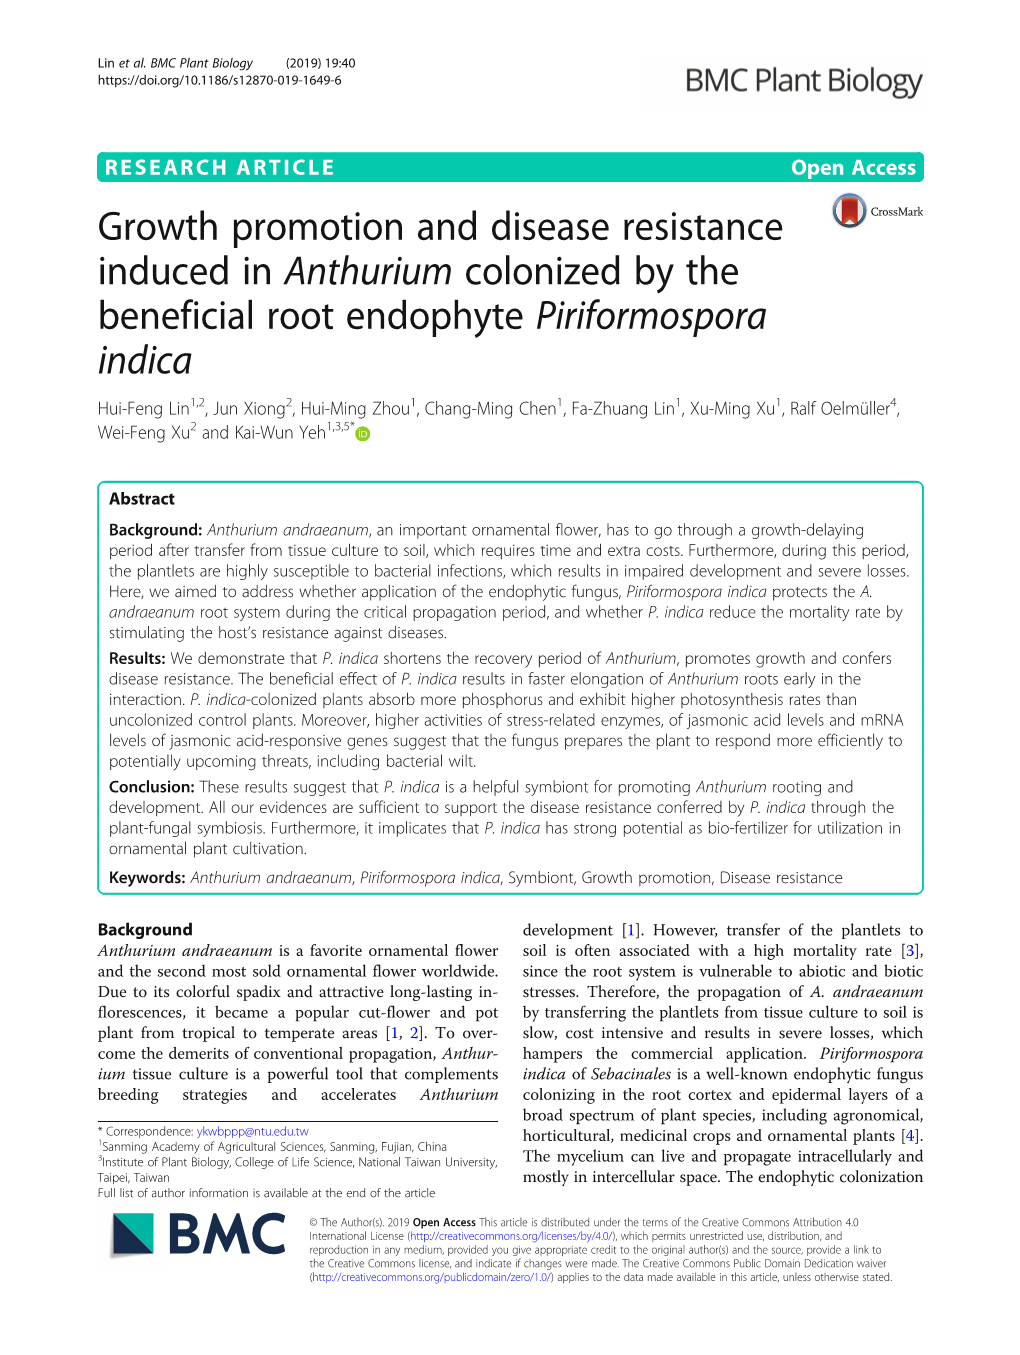 Growth Promotion and Disease Resistance Induced in Anthurium